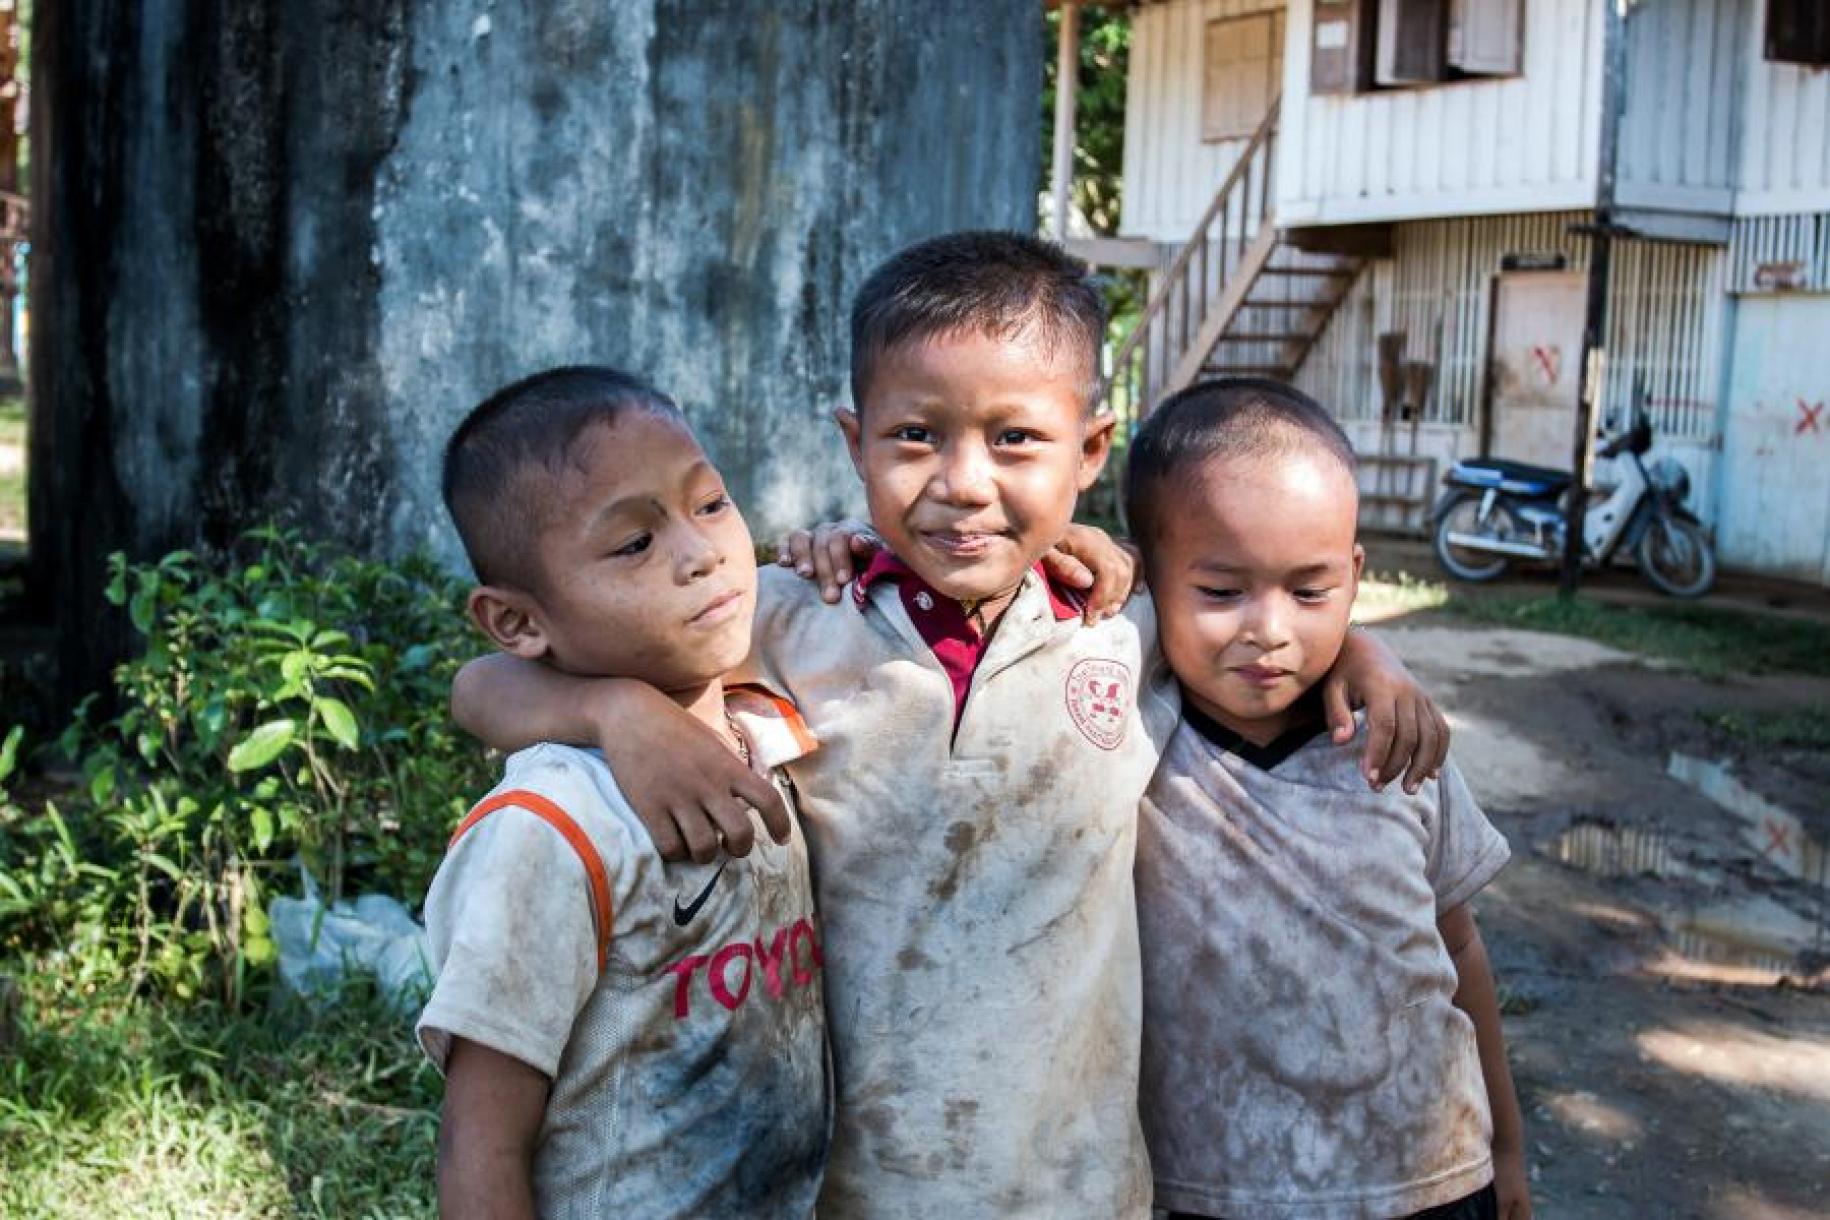 Three young boys with their arms across each other pose for the camera. 